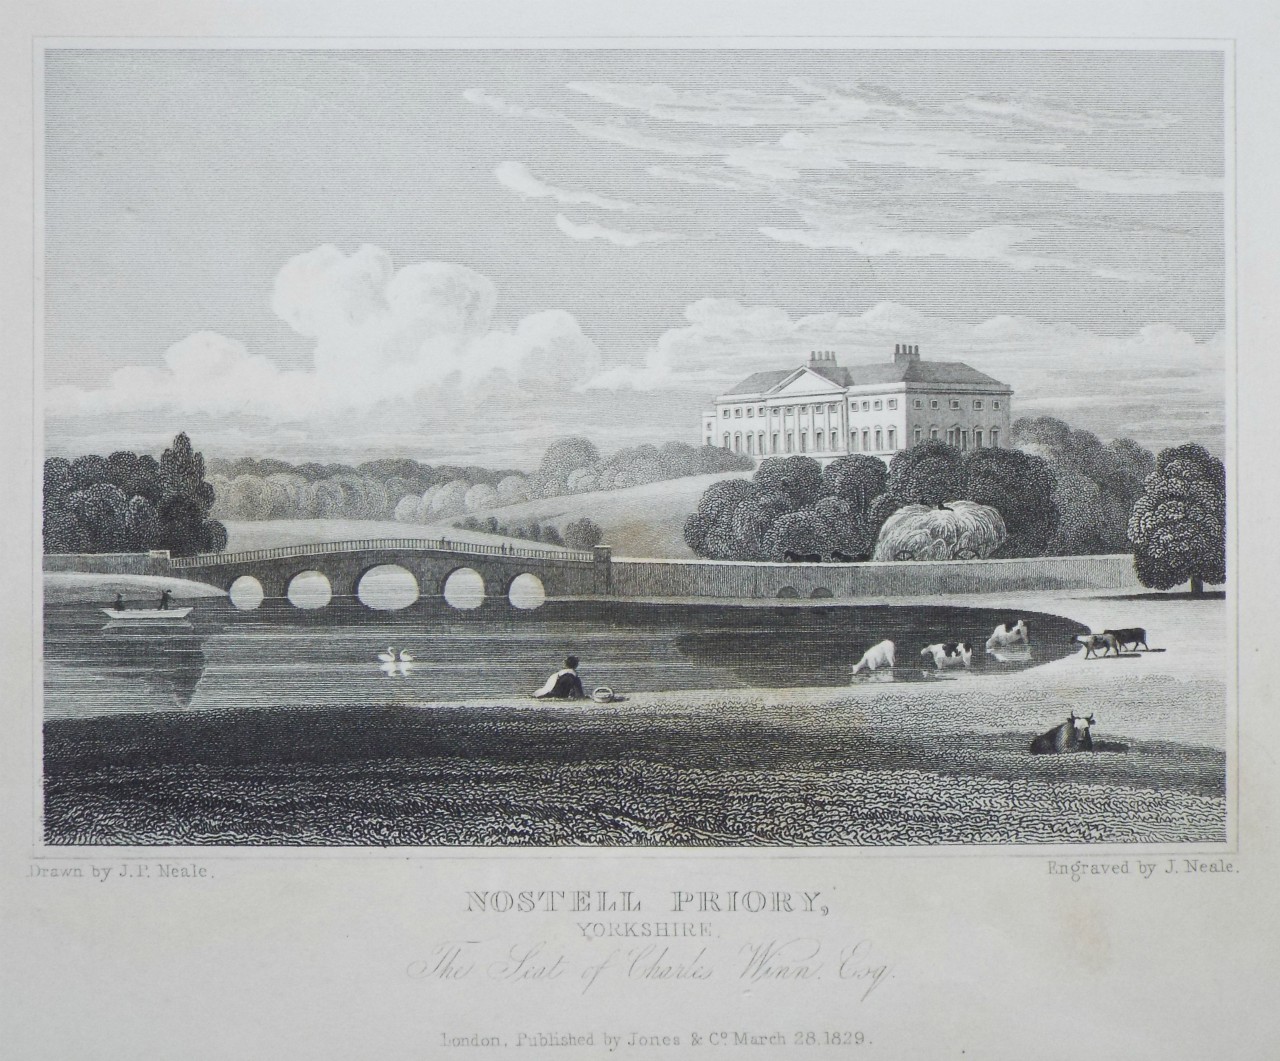 Print - Nostell Priory, Yorkshire. The Seat of Charles Winn, Esq. - Neale